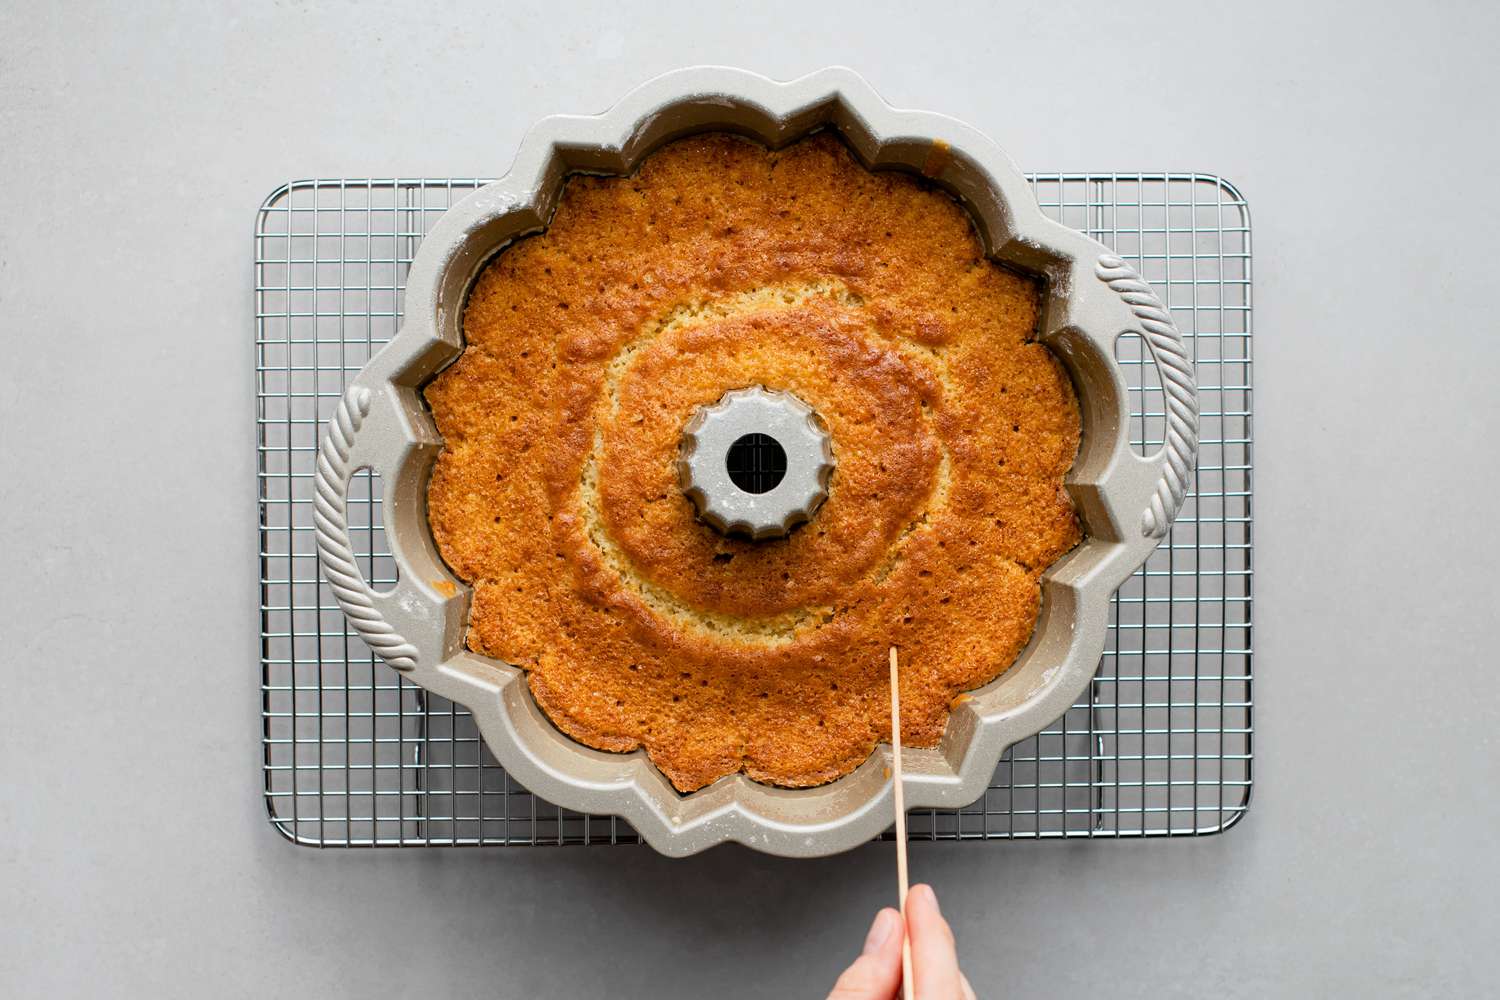 Kentucky Bundt cake in a pan over a rack pierced with small holes